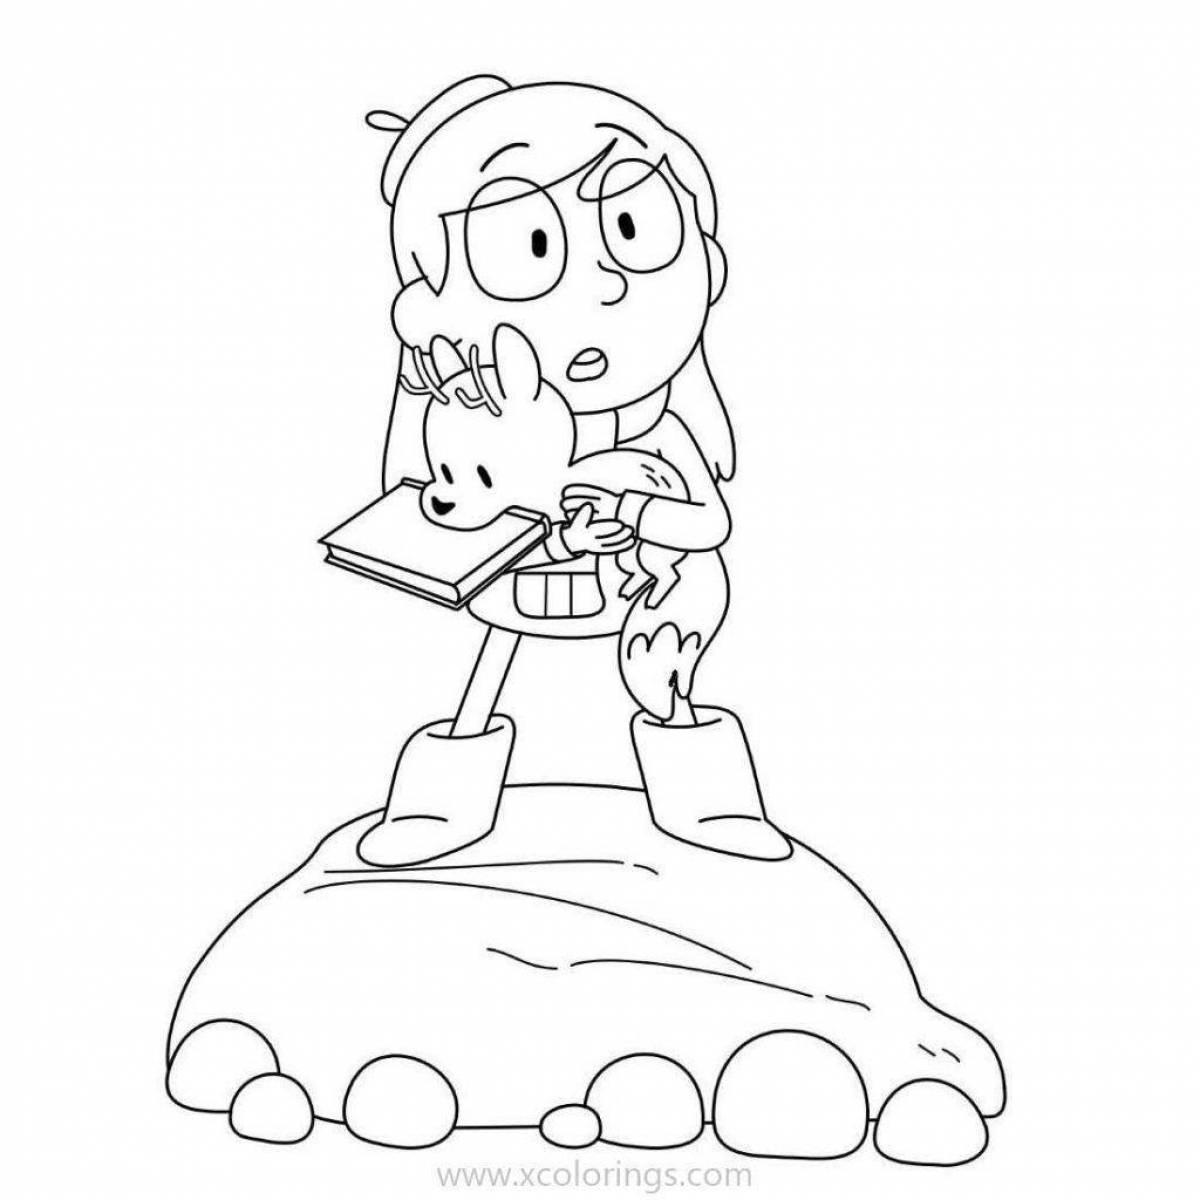 Hilda colorful coloring page